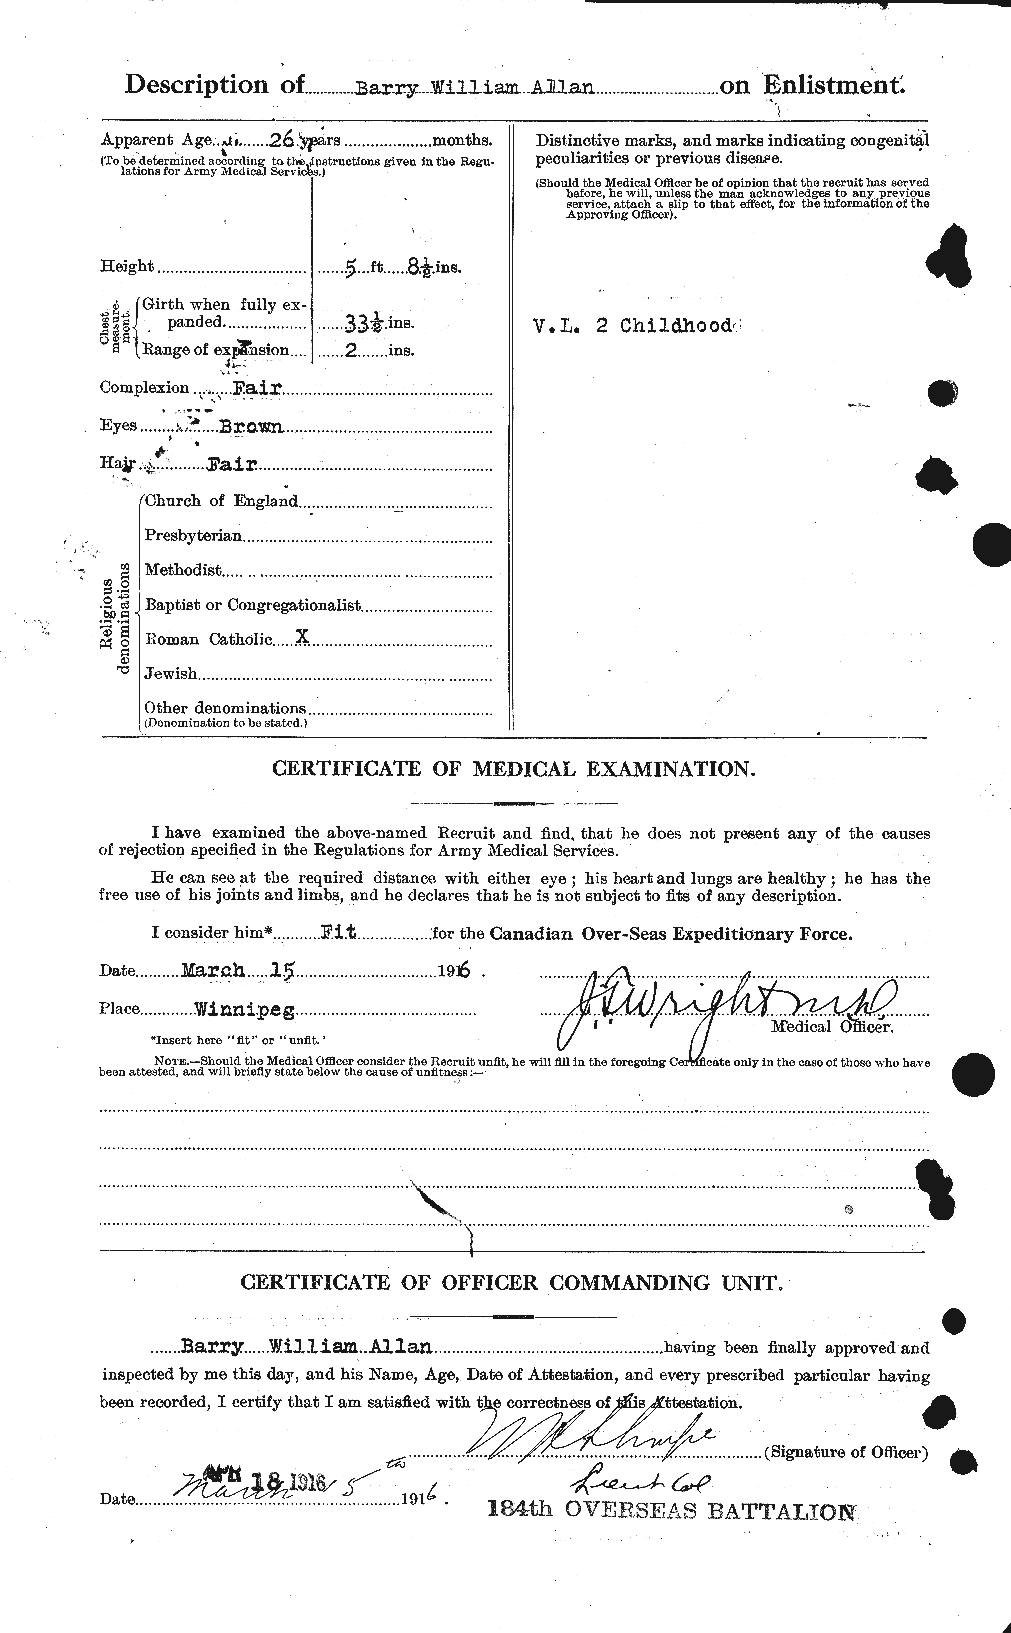 Personnel Records of the First World War - CEF 222052b